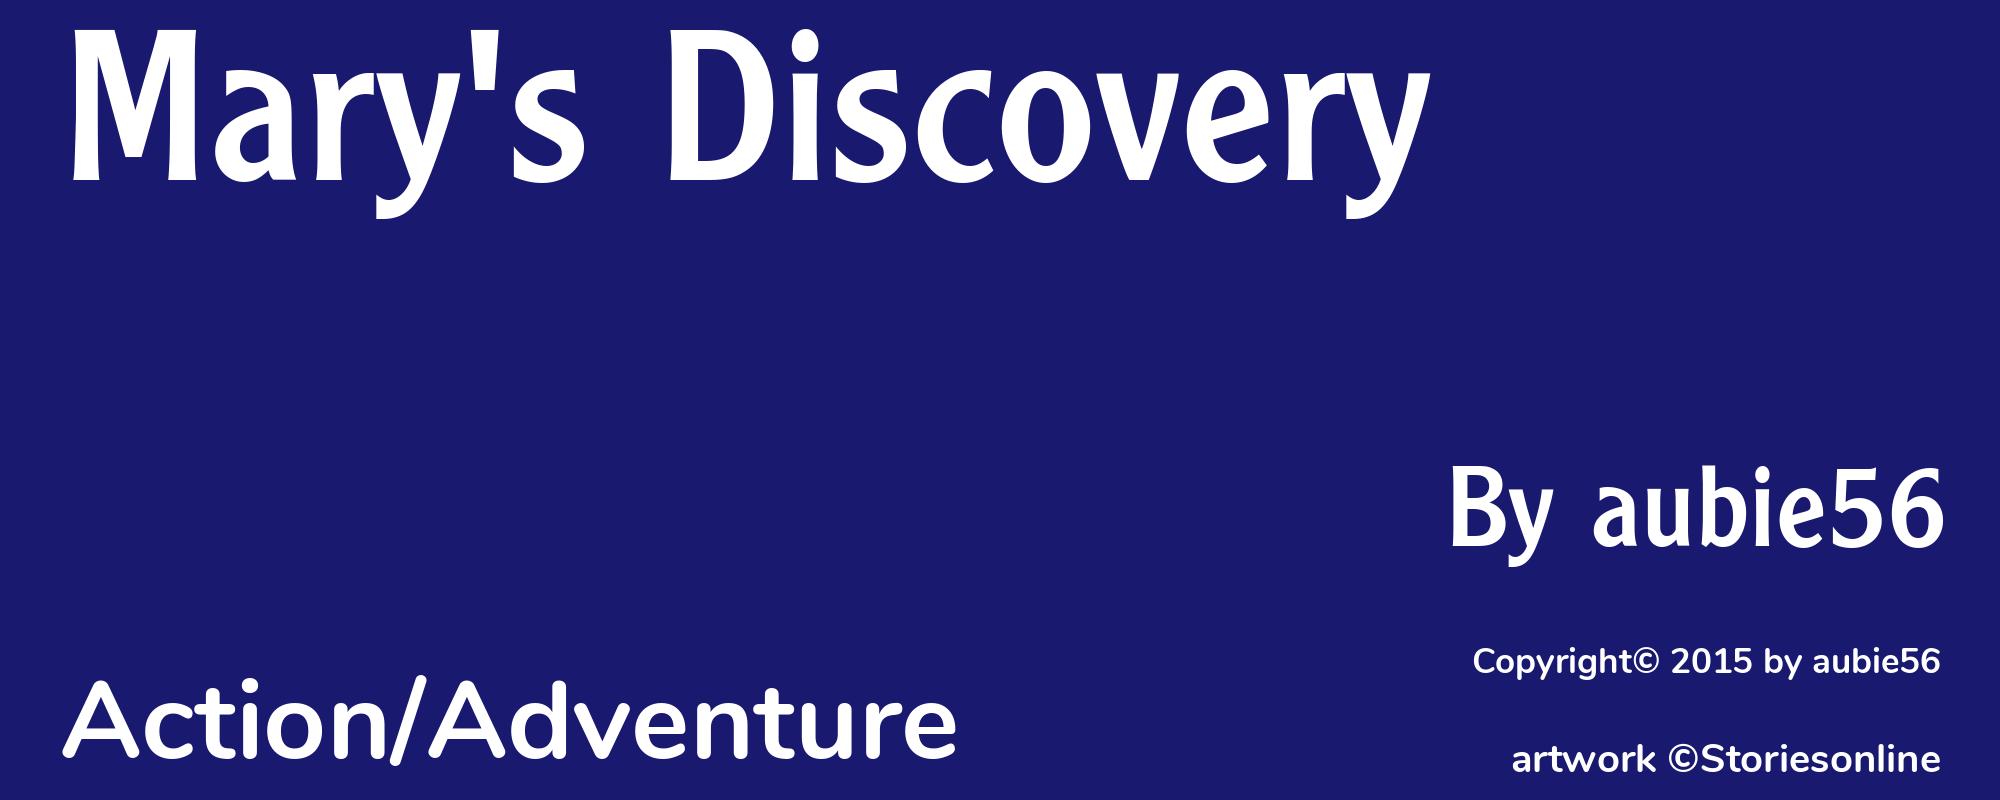 Mary's Discovery - Cover